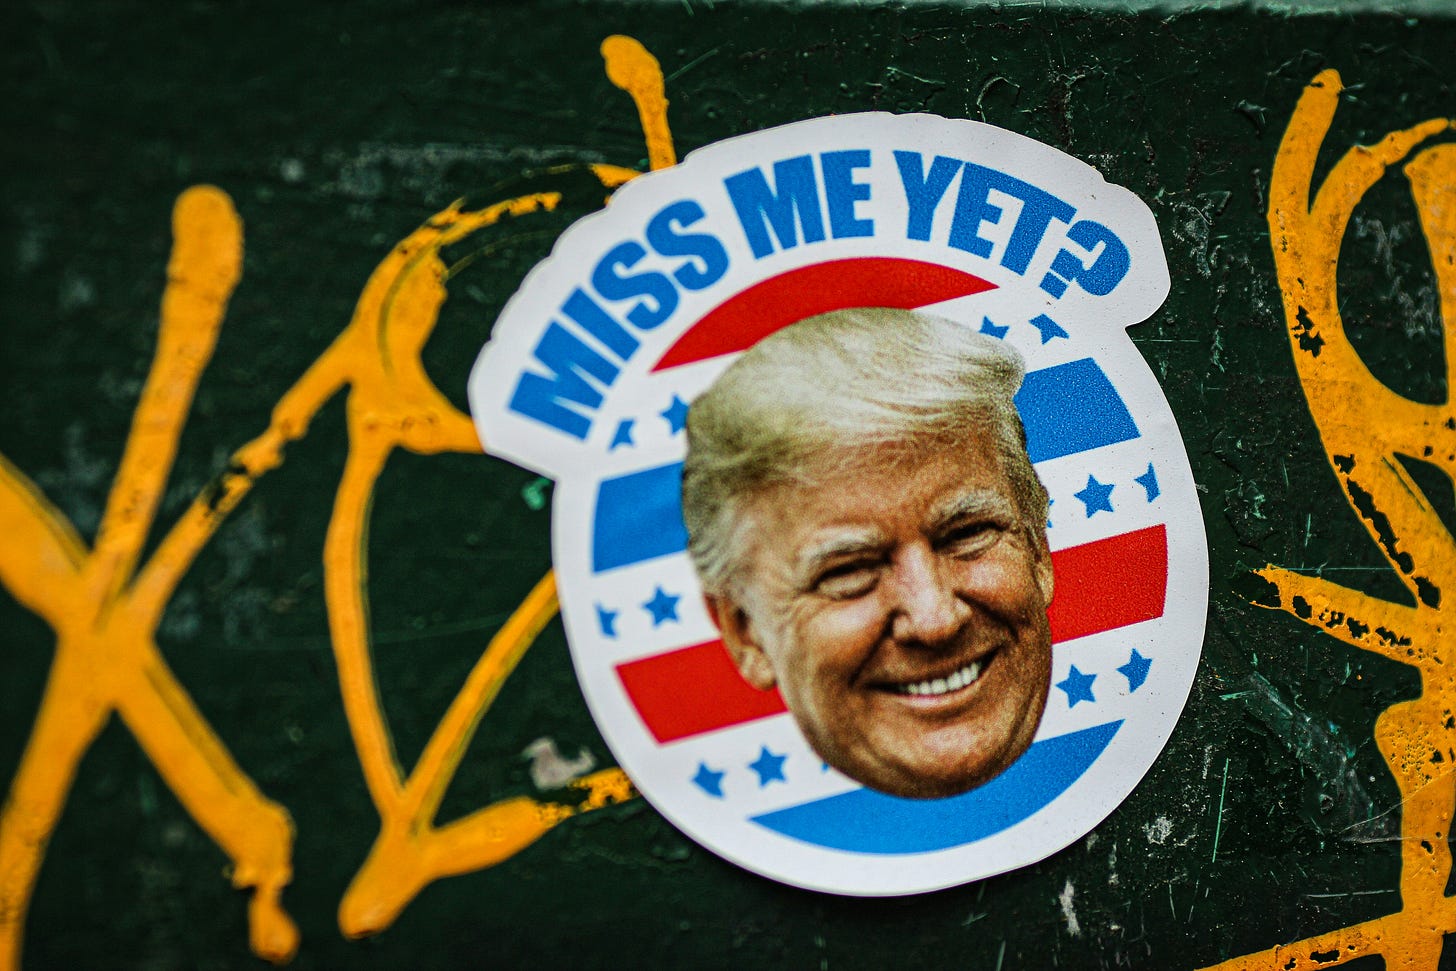 A sticker with Donald Trump's face that reads "Miss me yet?" on a wall.